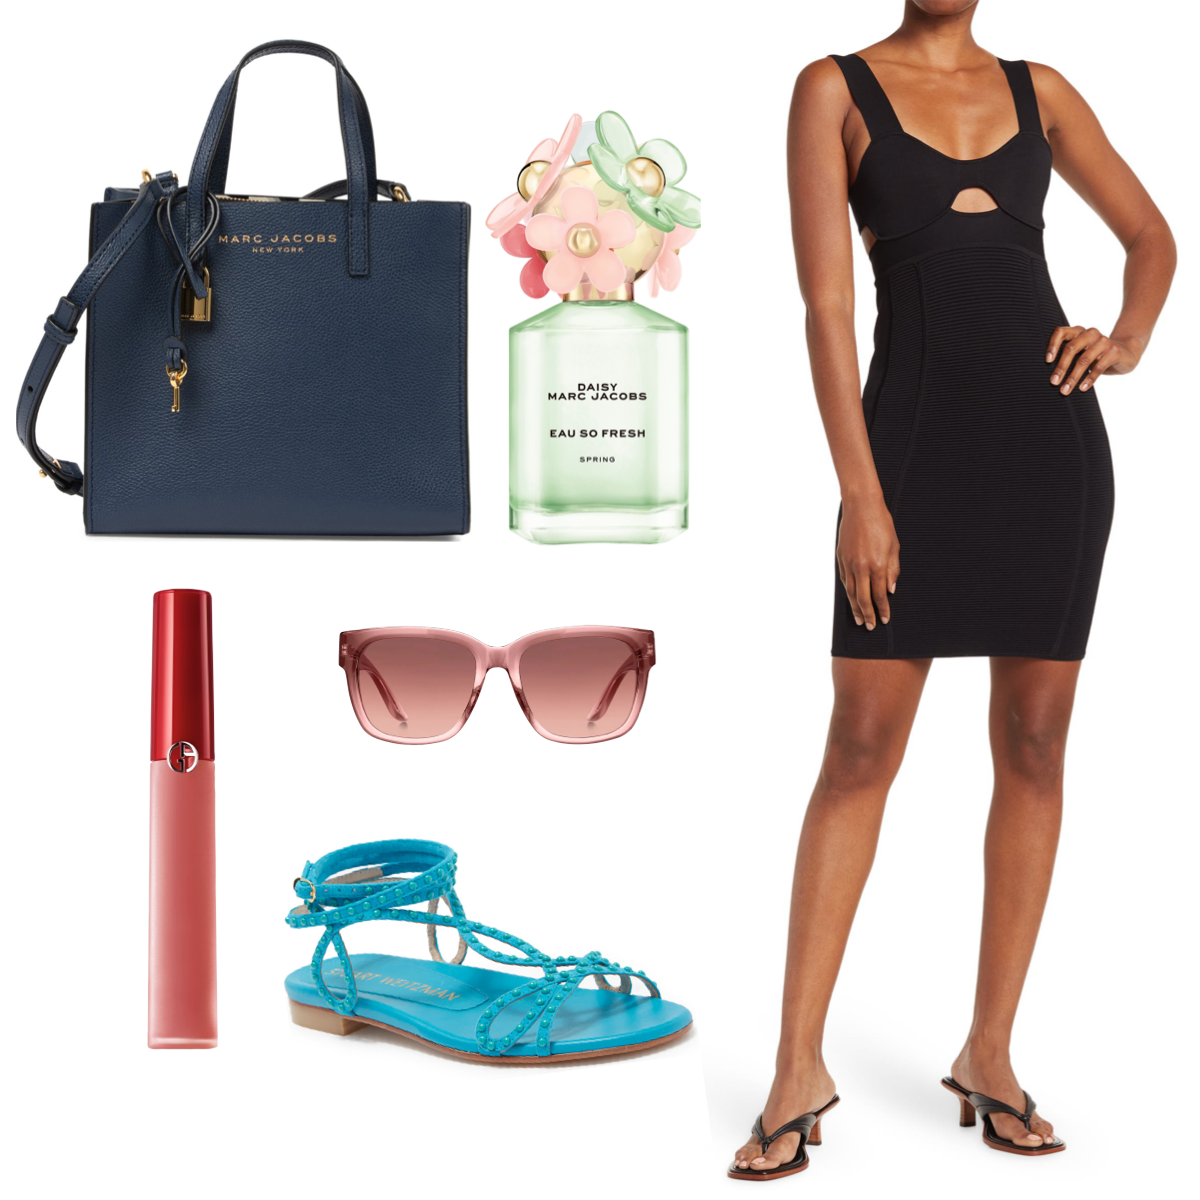 NORDSTROM RACK SHOP WITH ME 2023  LUXURY & DESIGNER HANDBAGS, SHOES,  JEWELRY, NEW ITEMS 